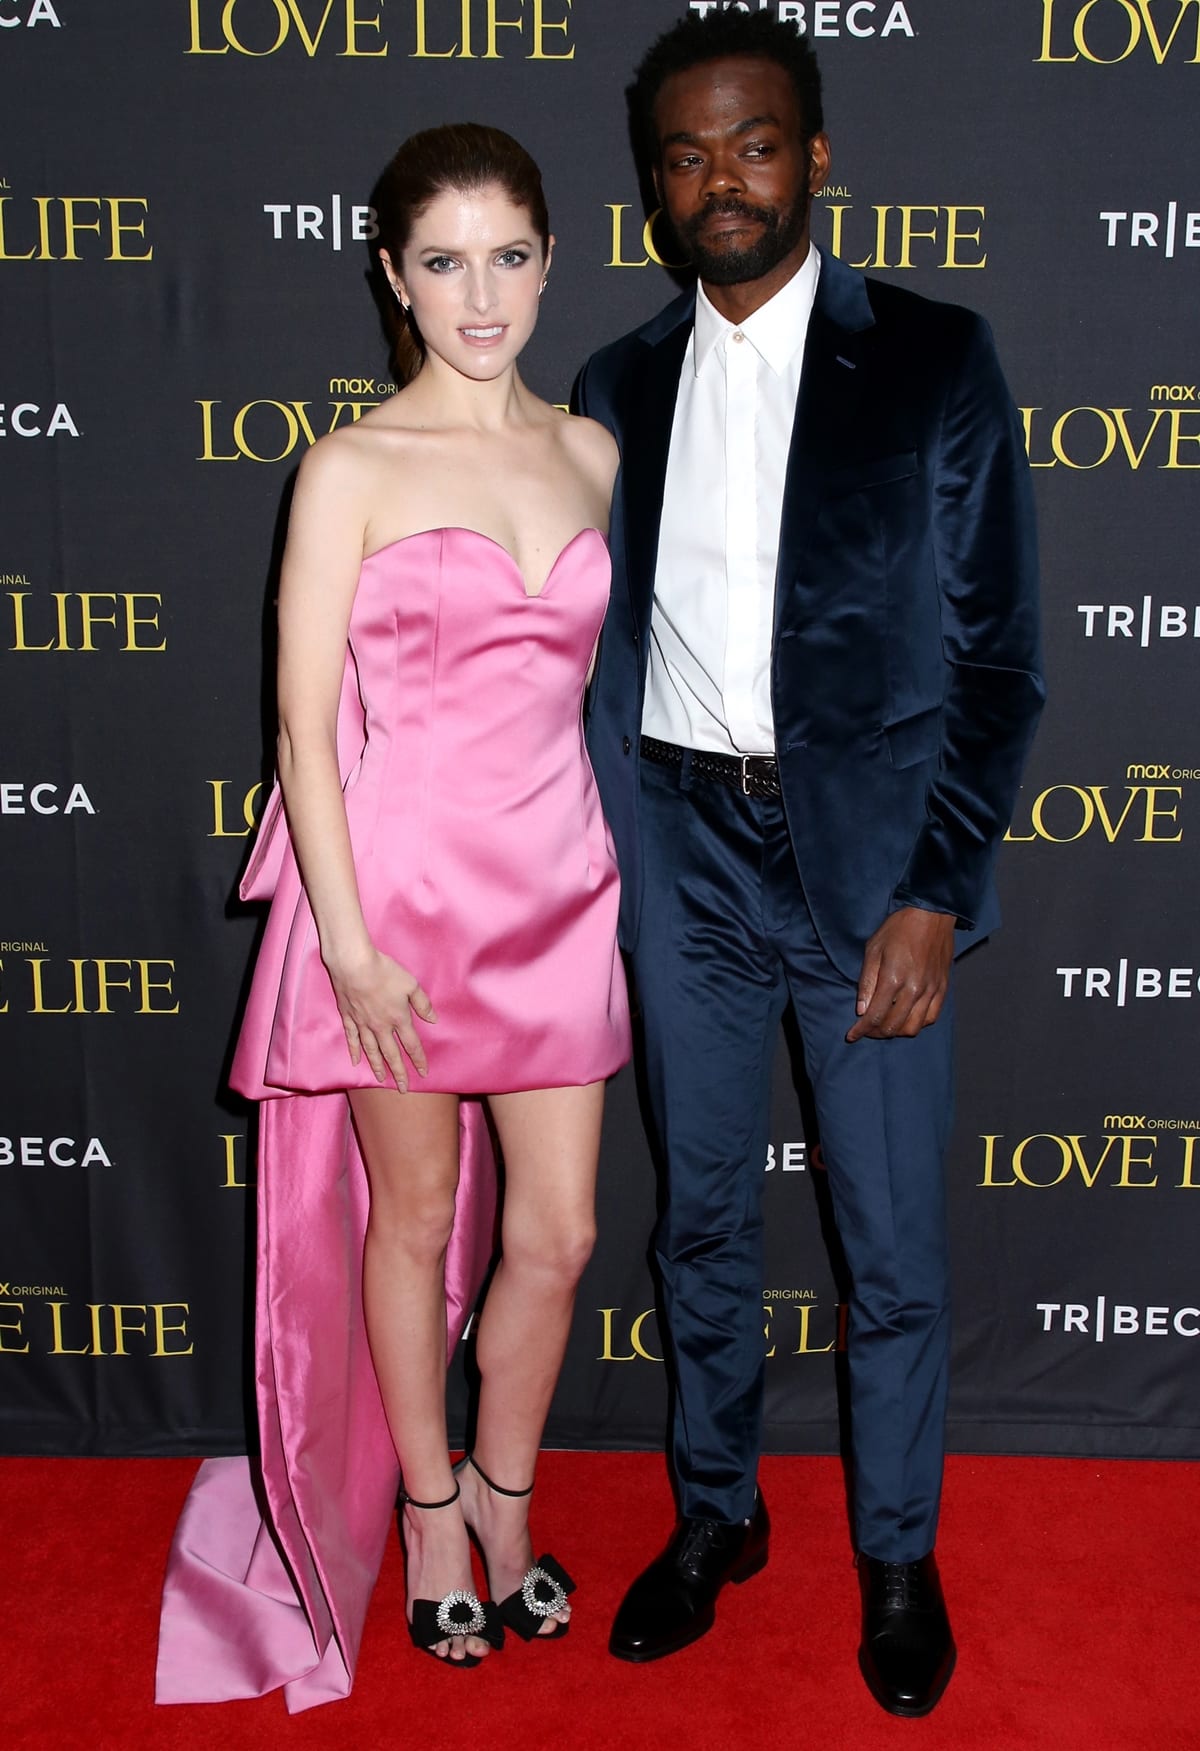 Anna Kendrick portrays recent college graduate Darby Carter and William Jackson Harper plays recent divorcée Marcus Watkins in the American romantic comedy anthology streaming television series Love Life